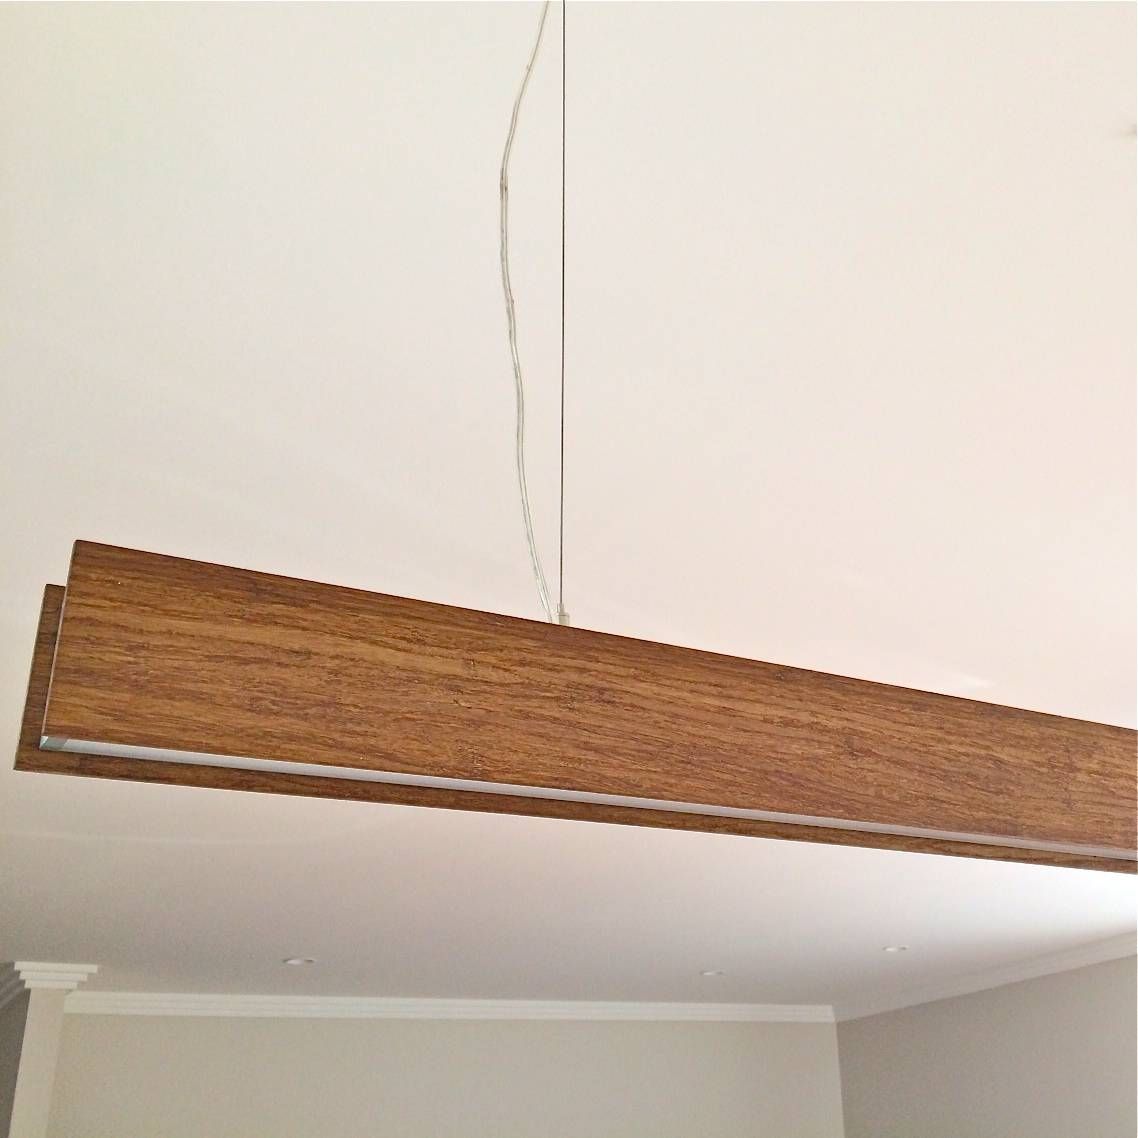 Timber Beam Pendant Light | Timber Lights Sydney With Wooden Pendant Lights (View 14 of 15)